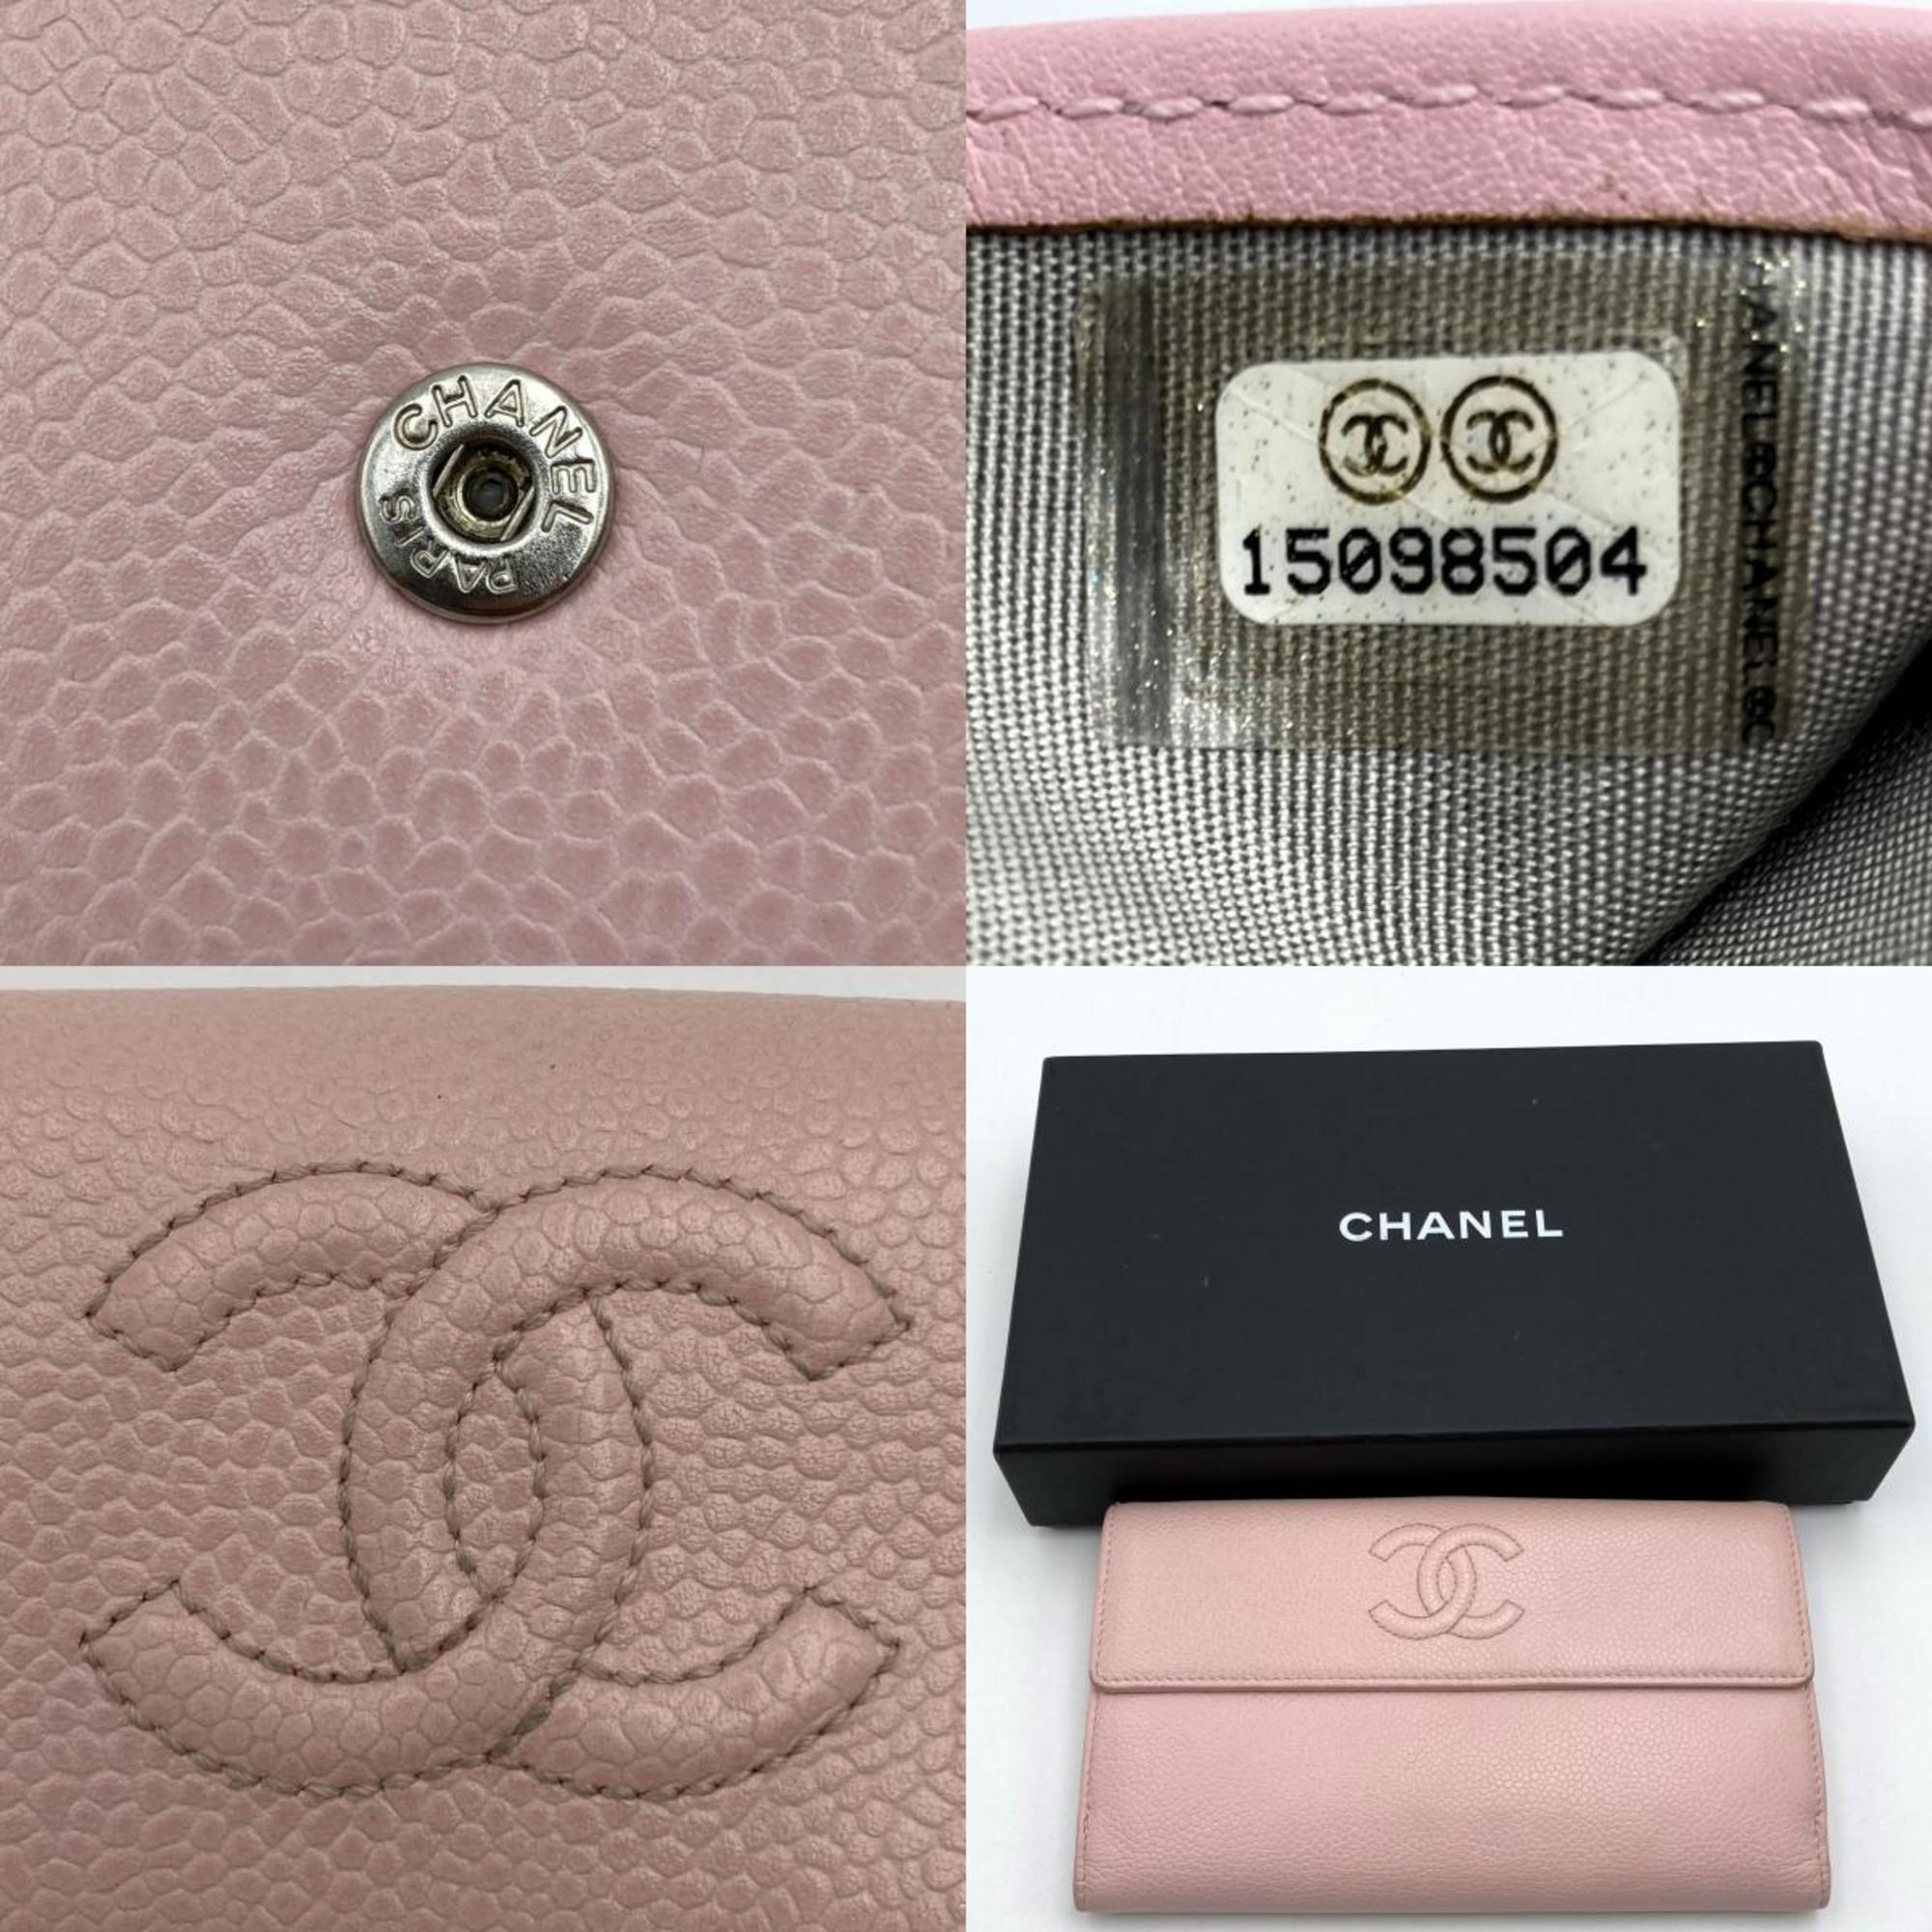 CHANEL Cocomark Long Wallet Pink Caviar Skin Ladies Fashion Accessories Brand USED